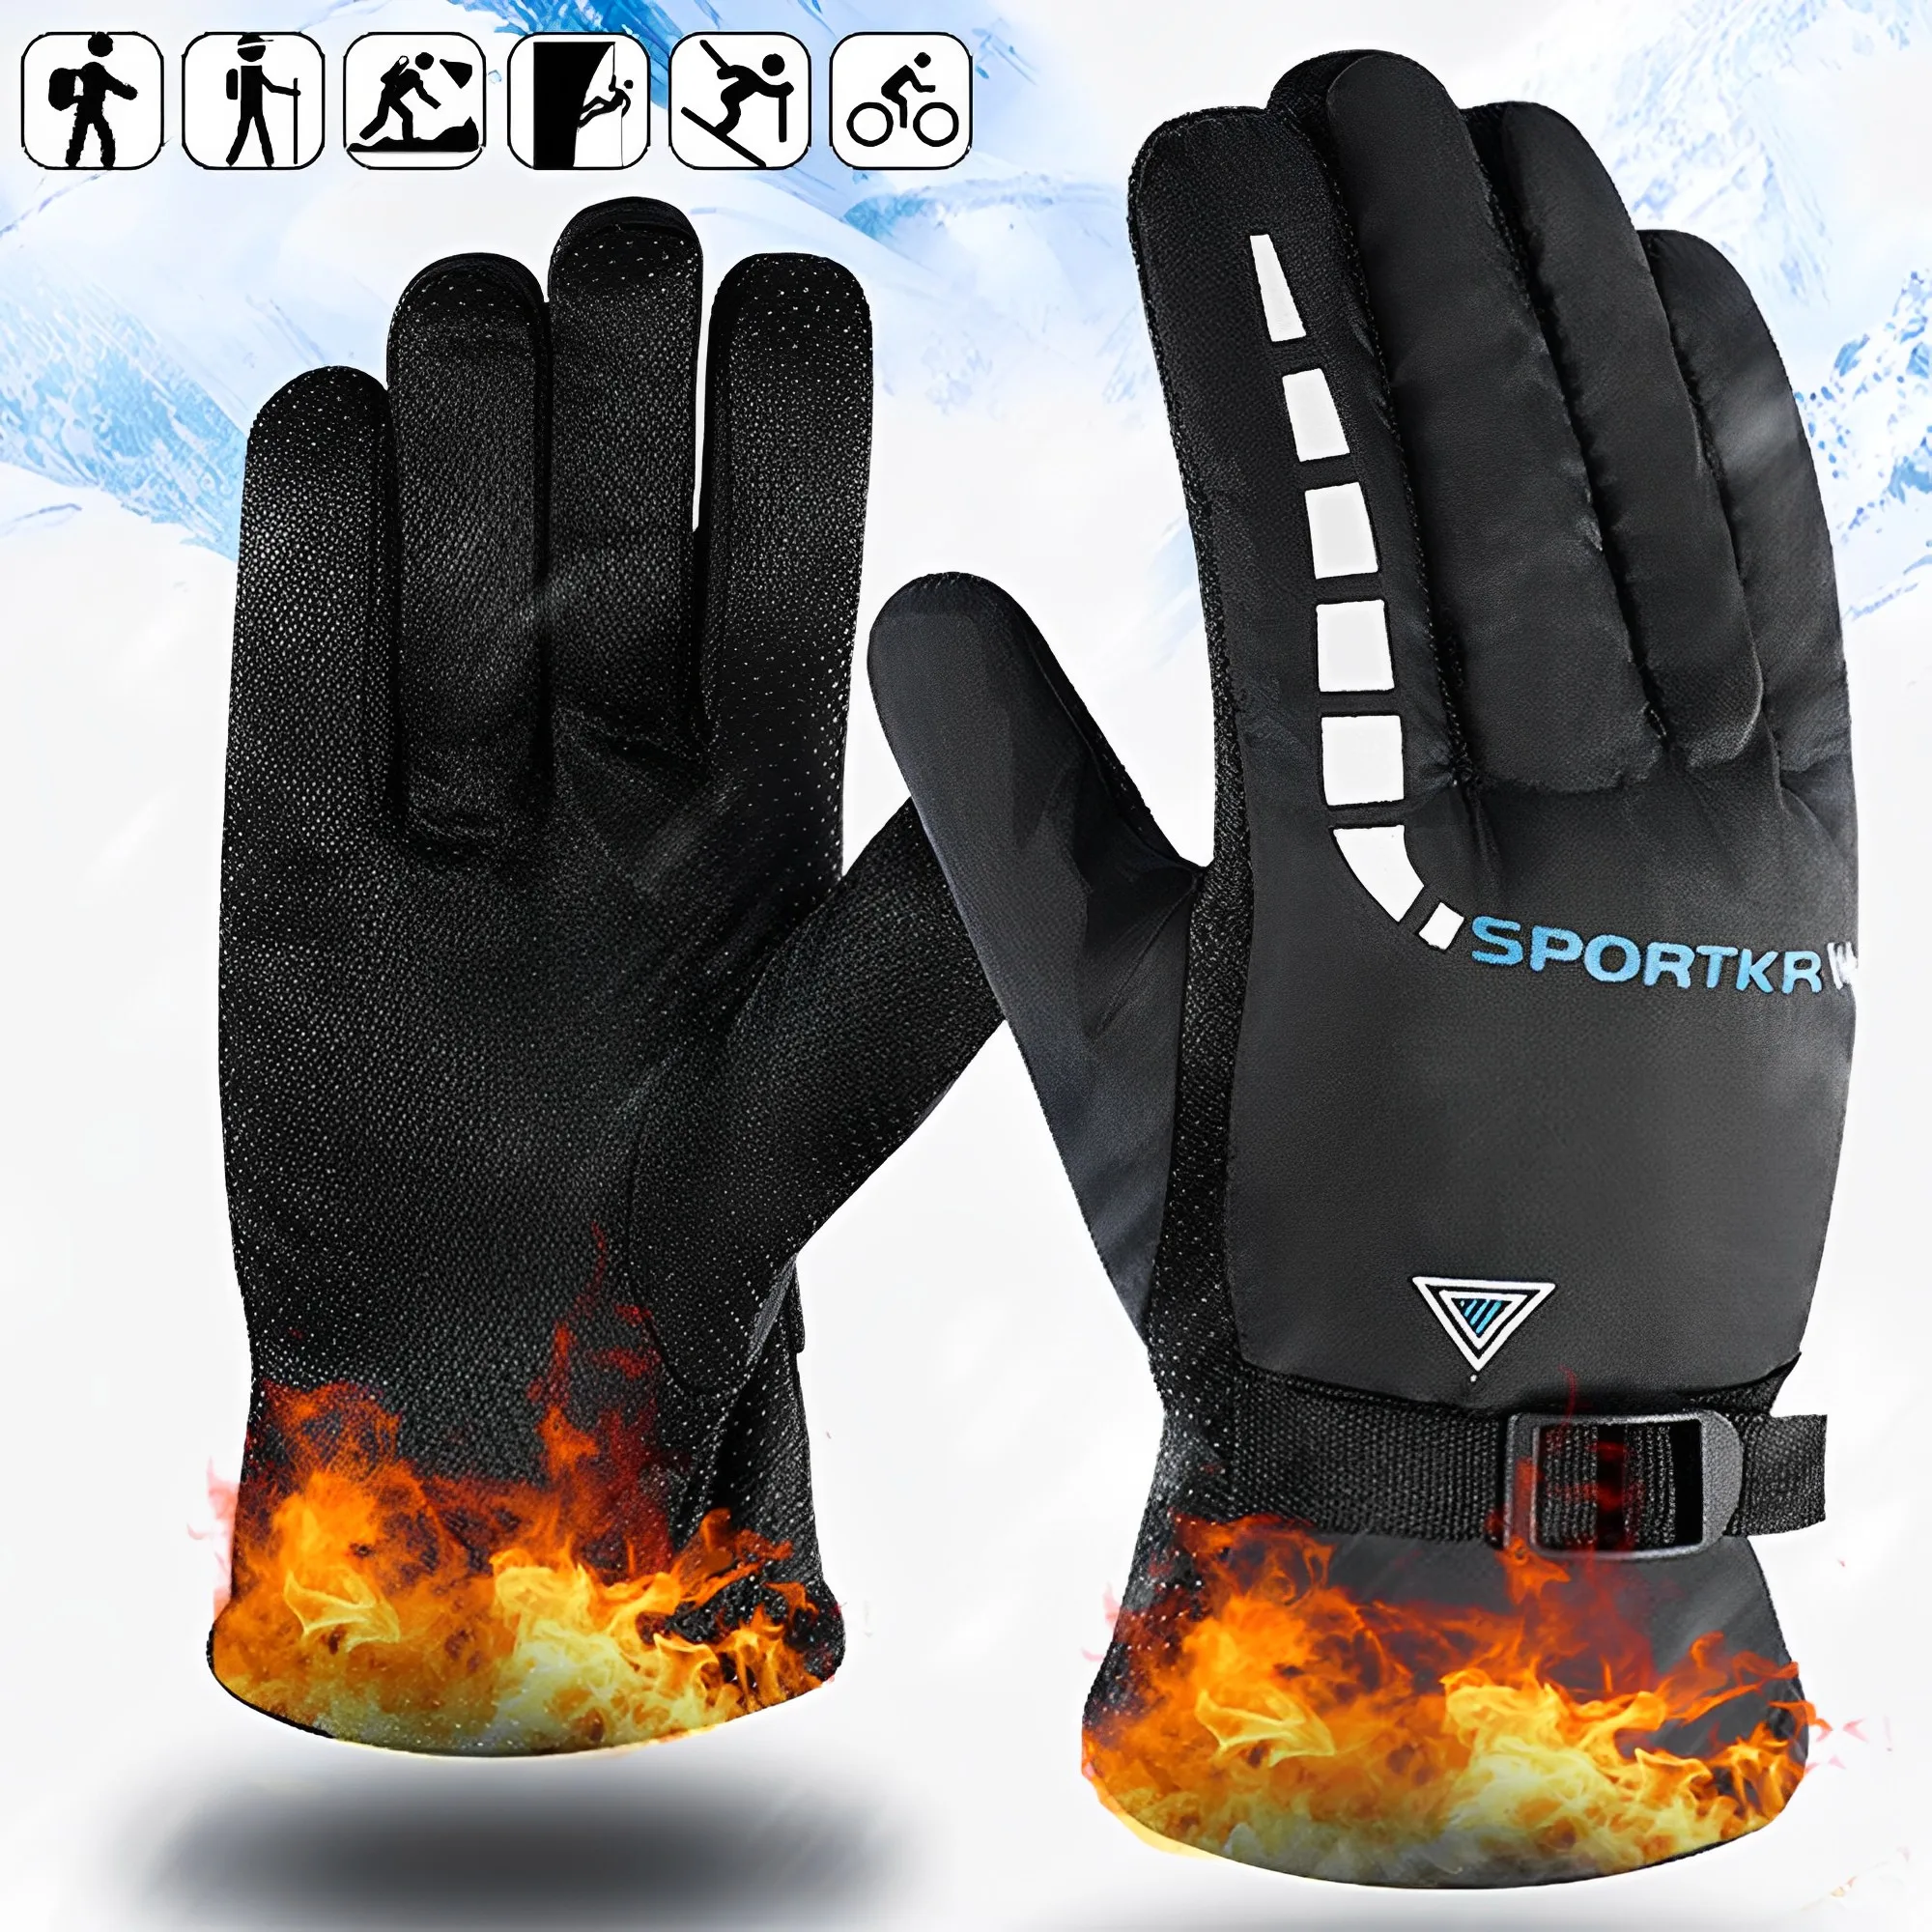 Motorcycle Cycling Gloves Winter Outdoor Waterproof Skiing Riding Hiking Warm - £13.71 GBP